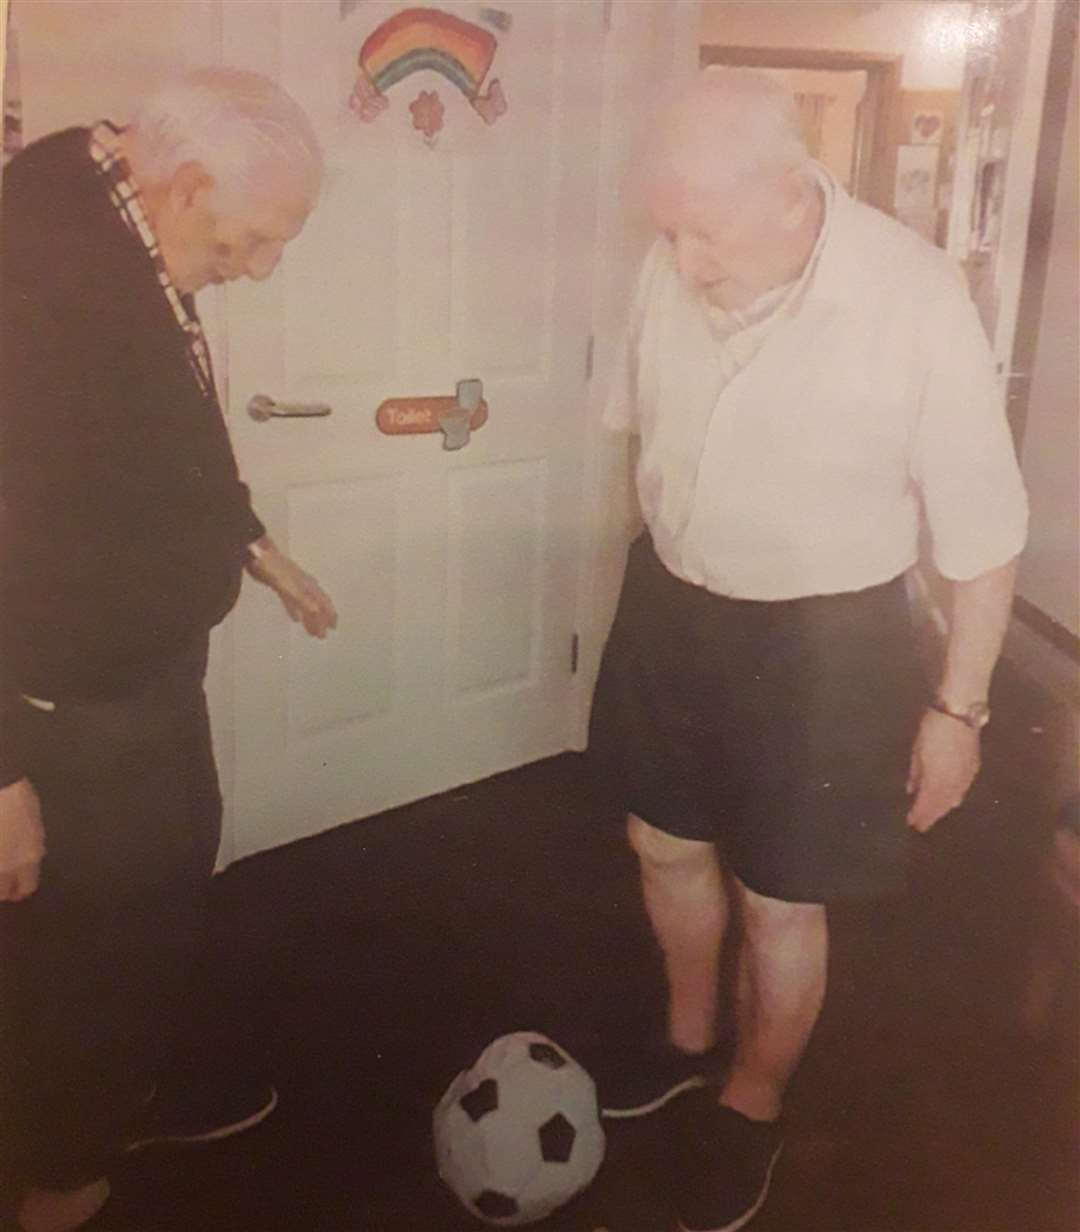 Don Townsend and Les Riggs were on rival teams during a 1963 match between Crewe and Crystal Palace. They ended up in the same dementia home, Maurice House in Broadstairs where they had a kick about, 57 years later.